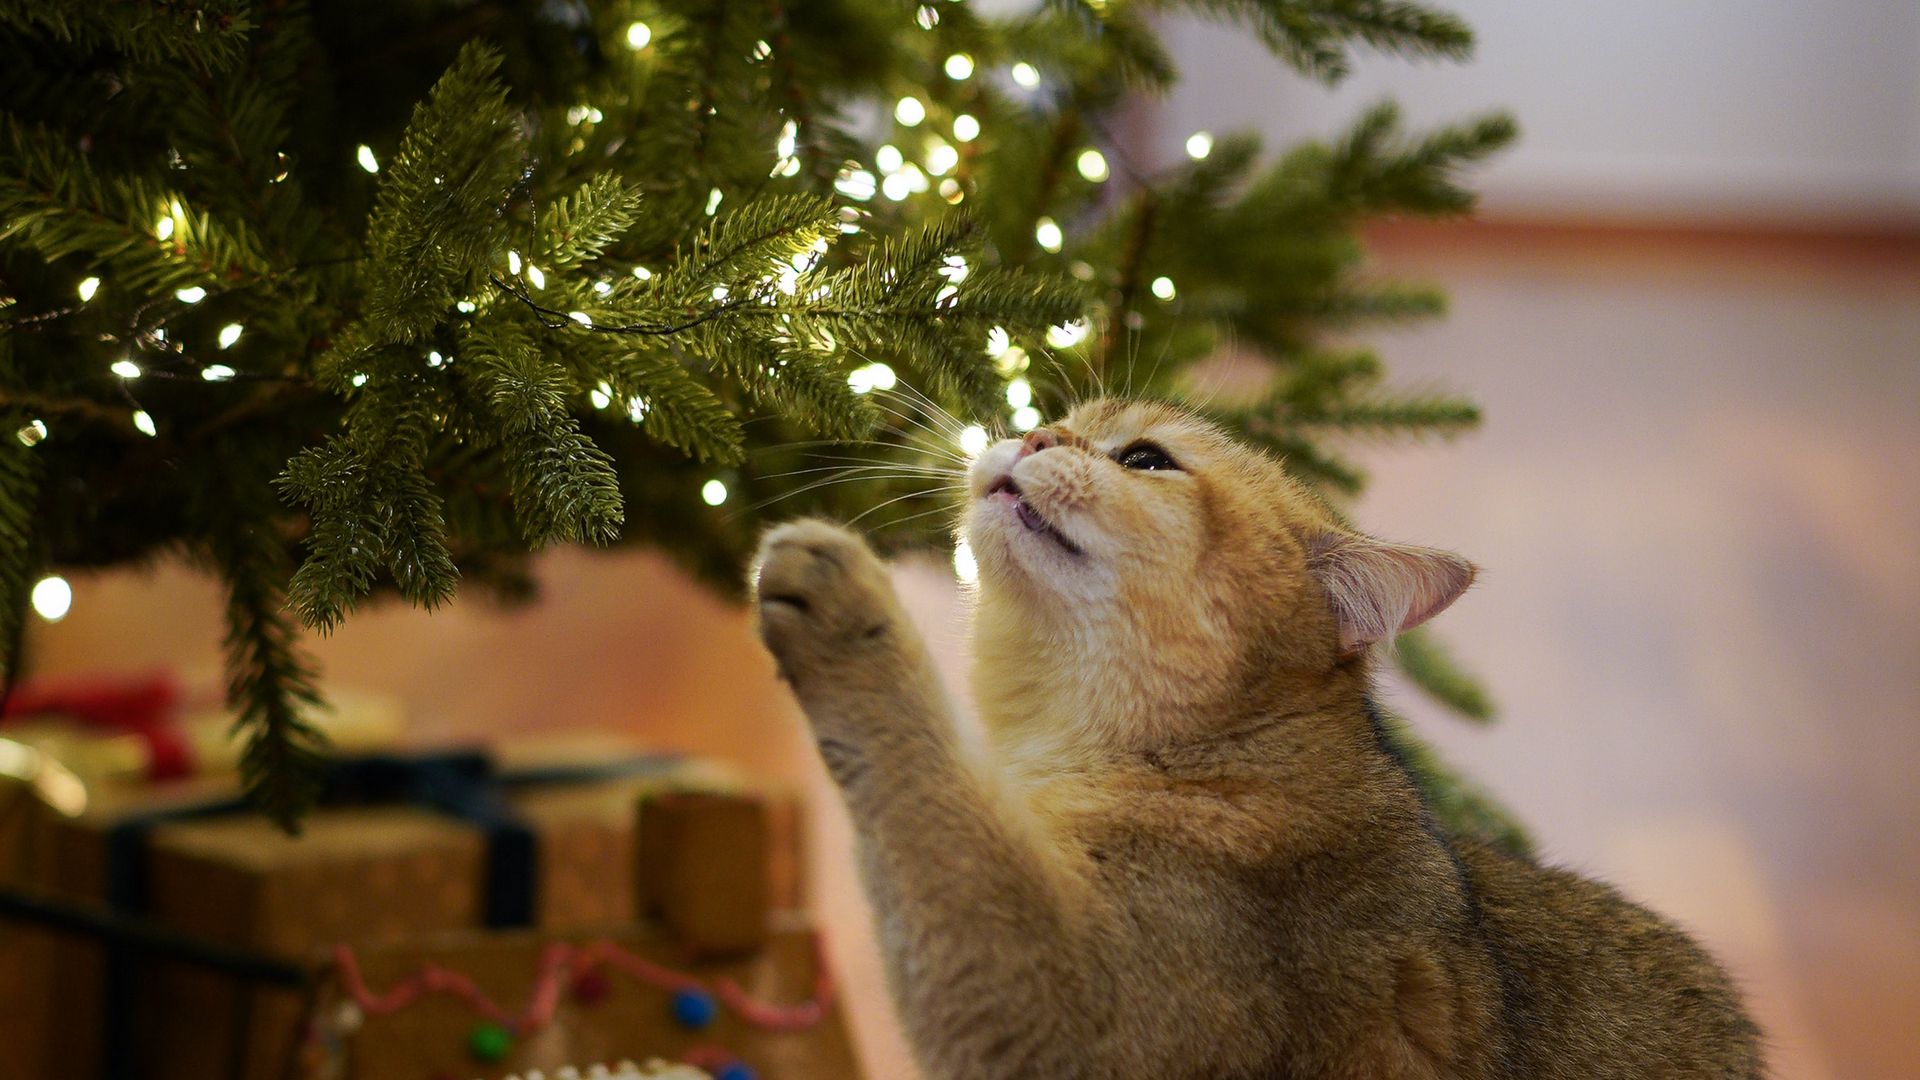 801 Christmas Cat Wallpaper Stock Photos  Free  RoyaltyFree Stock Photos  from Dreamstime